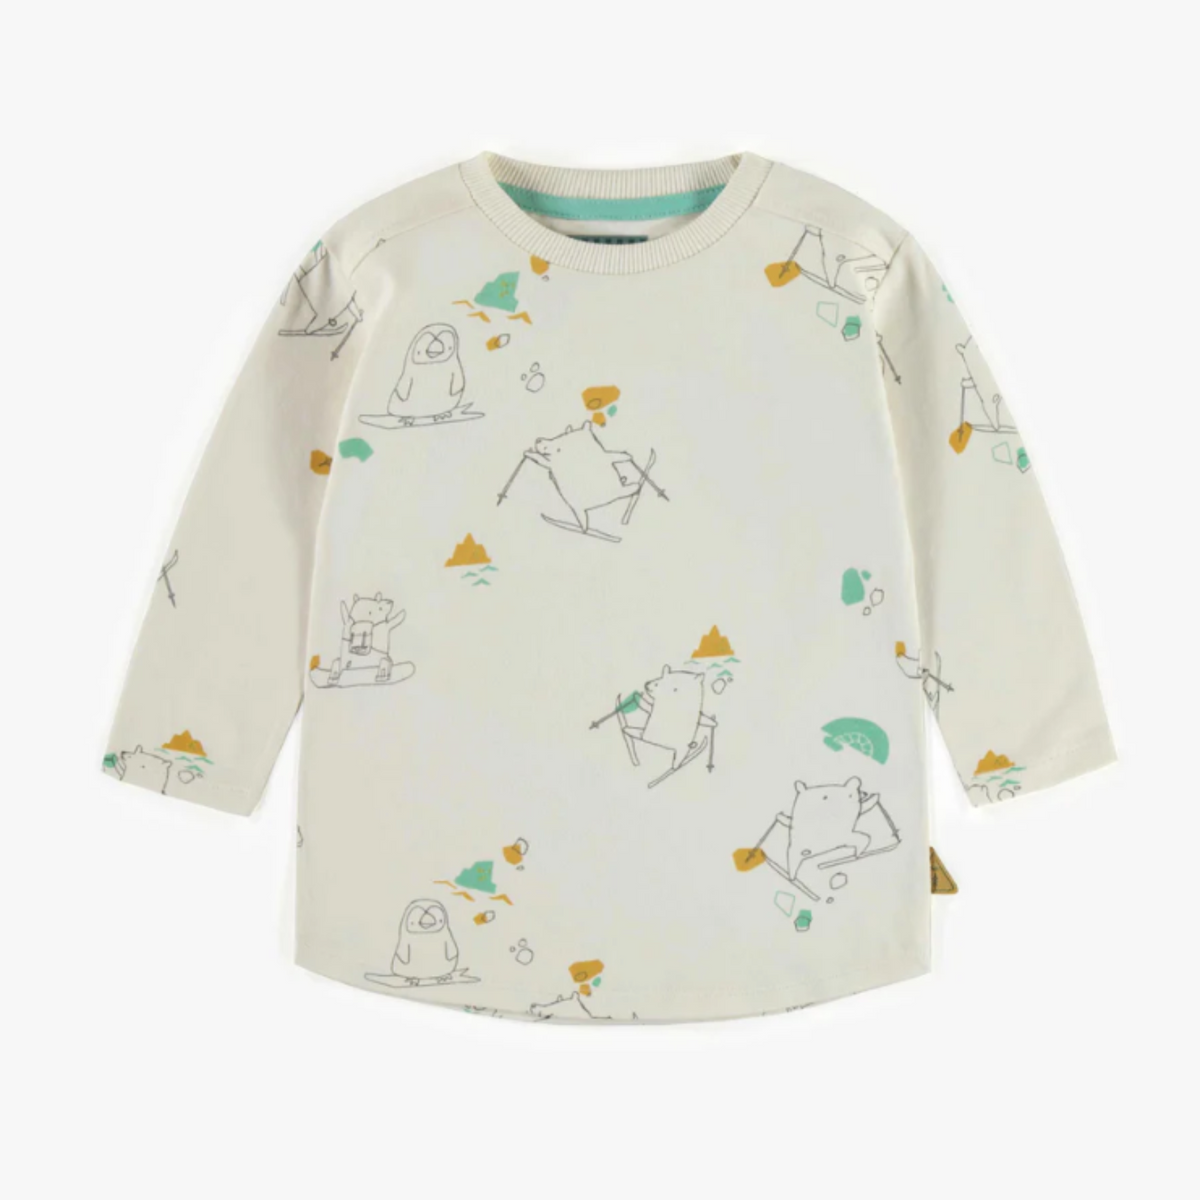 Cream Patterned Long Sleeve Shirt in Jersey, Toddler